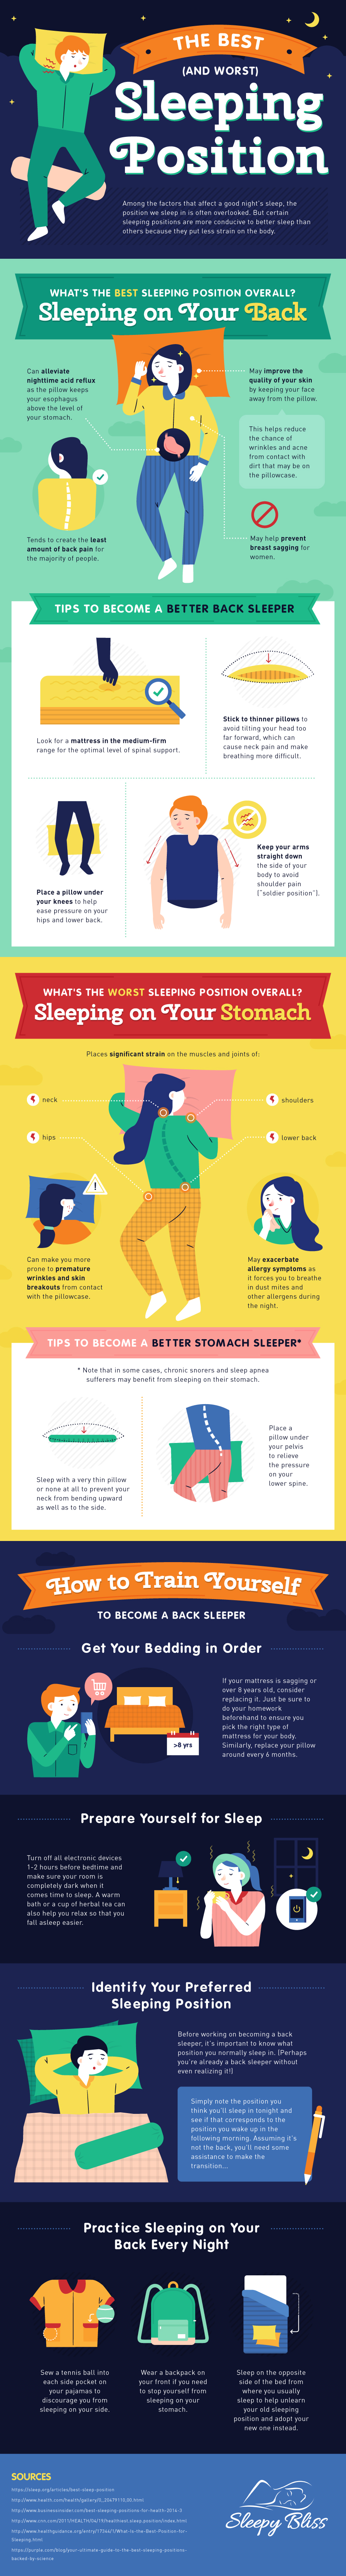 These Are The Best (And Worst) Sleep Positions For Good Posture